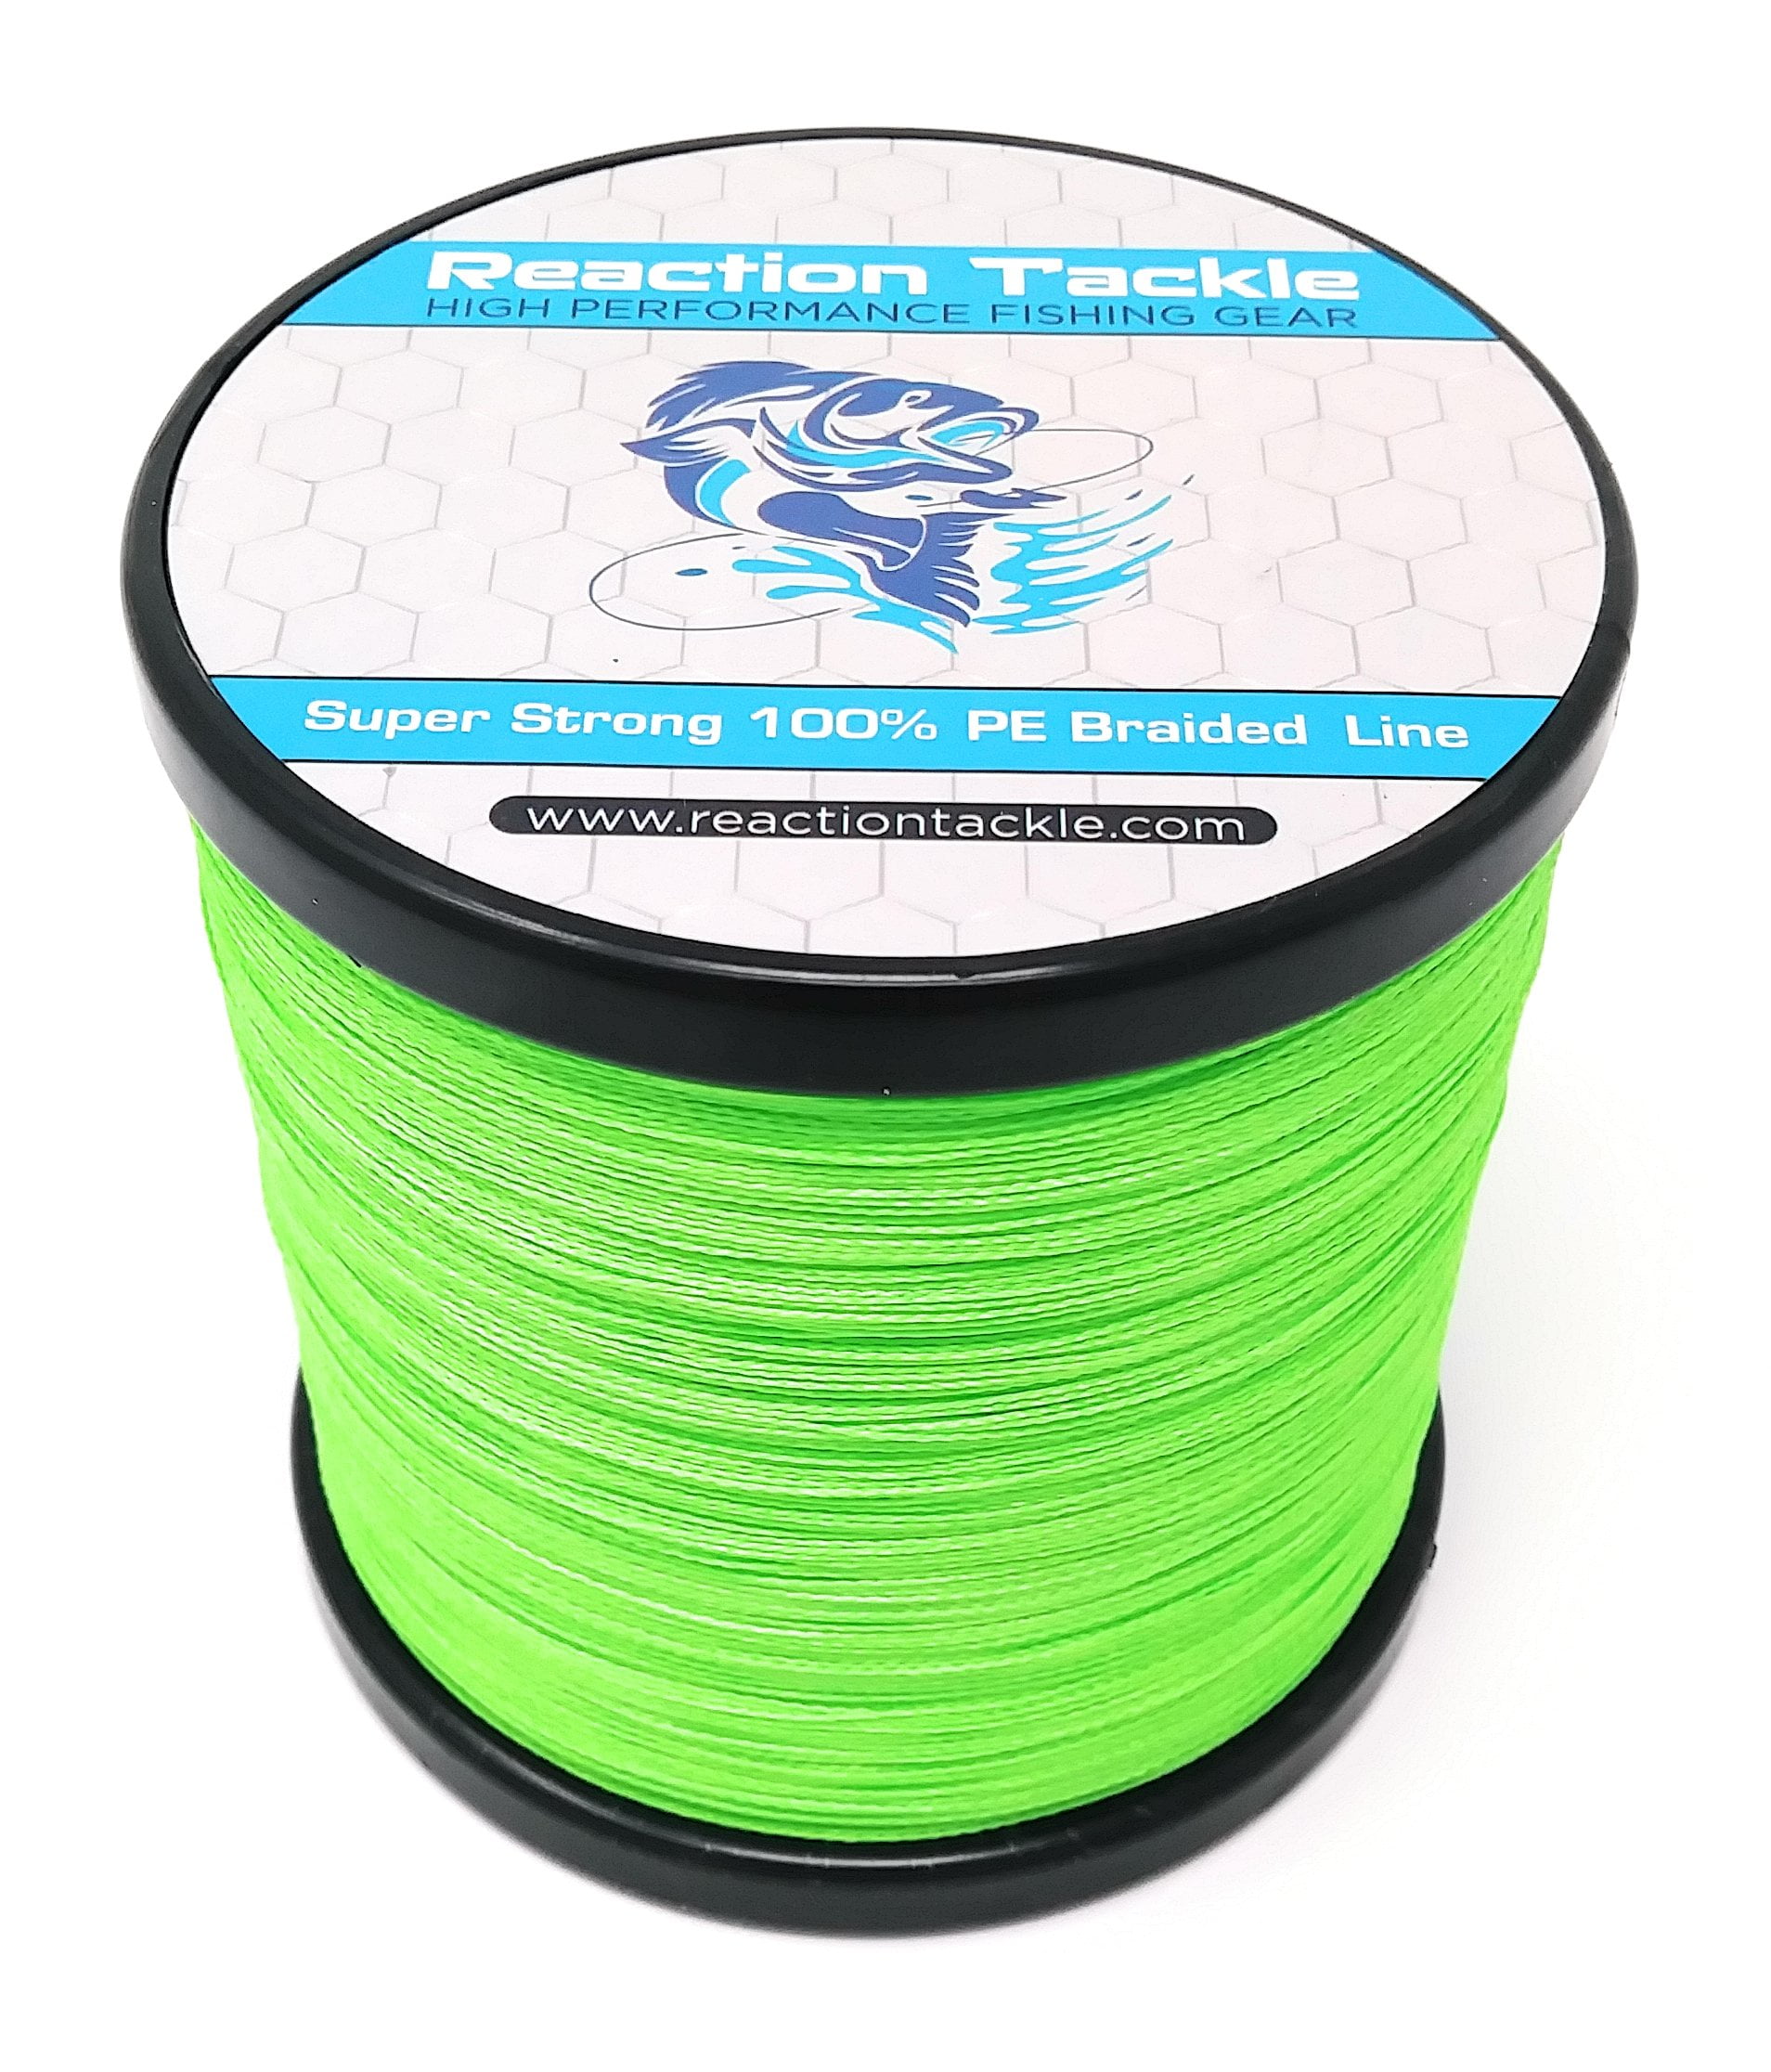 shop offers Reaction Tackle Braided Fishing Line Moss Green 20LB